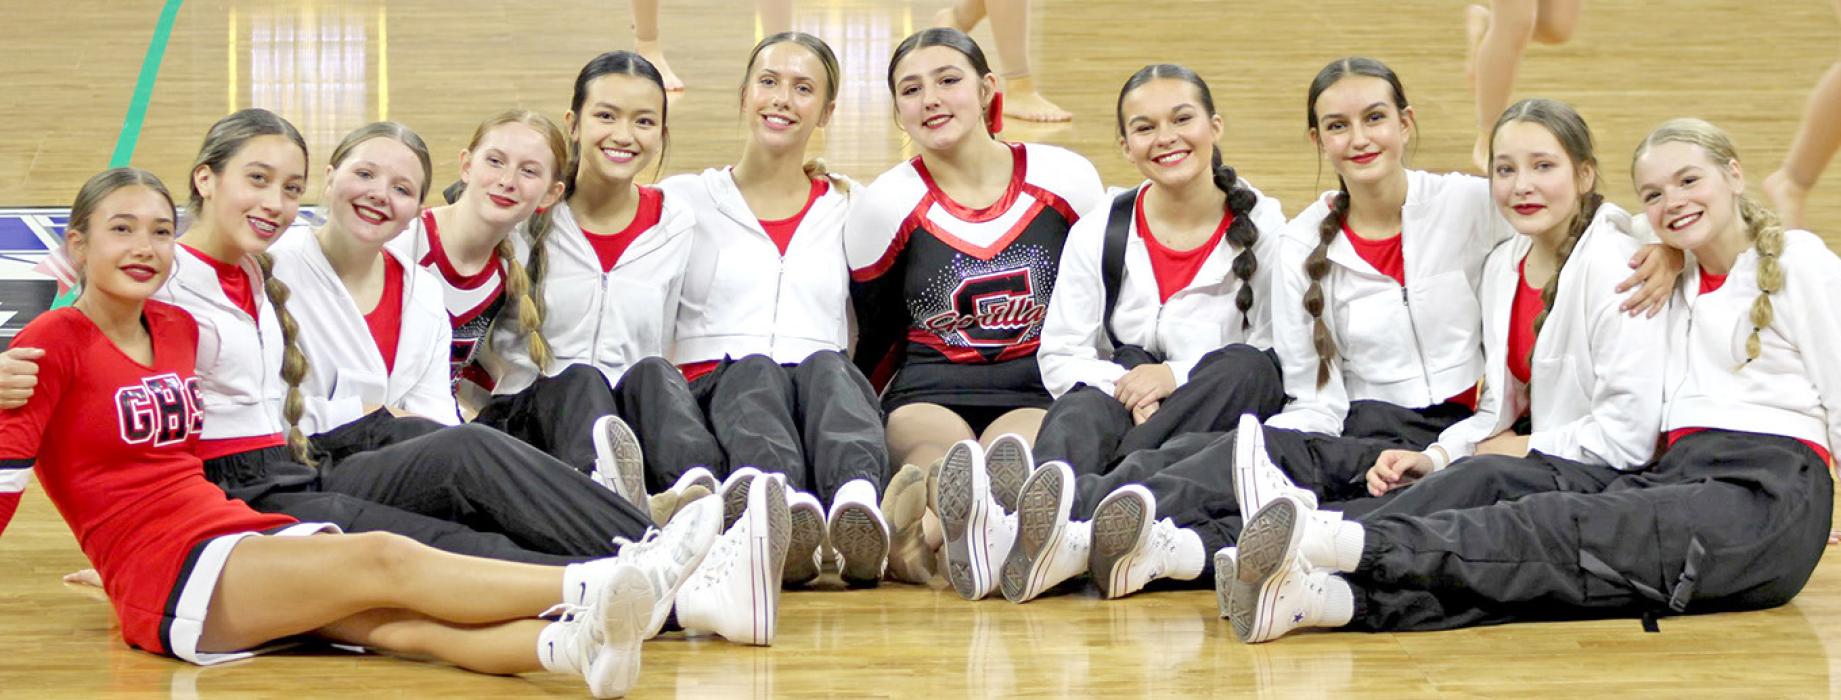 The team’s hip hop routine had the crowd engaged throughout the performance, but a head stand move caused such an eruption that the girls couldn’t hear their music.